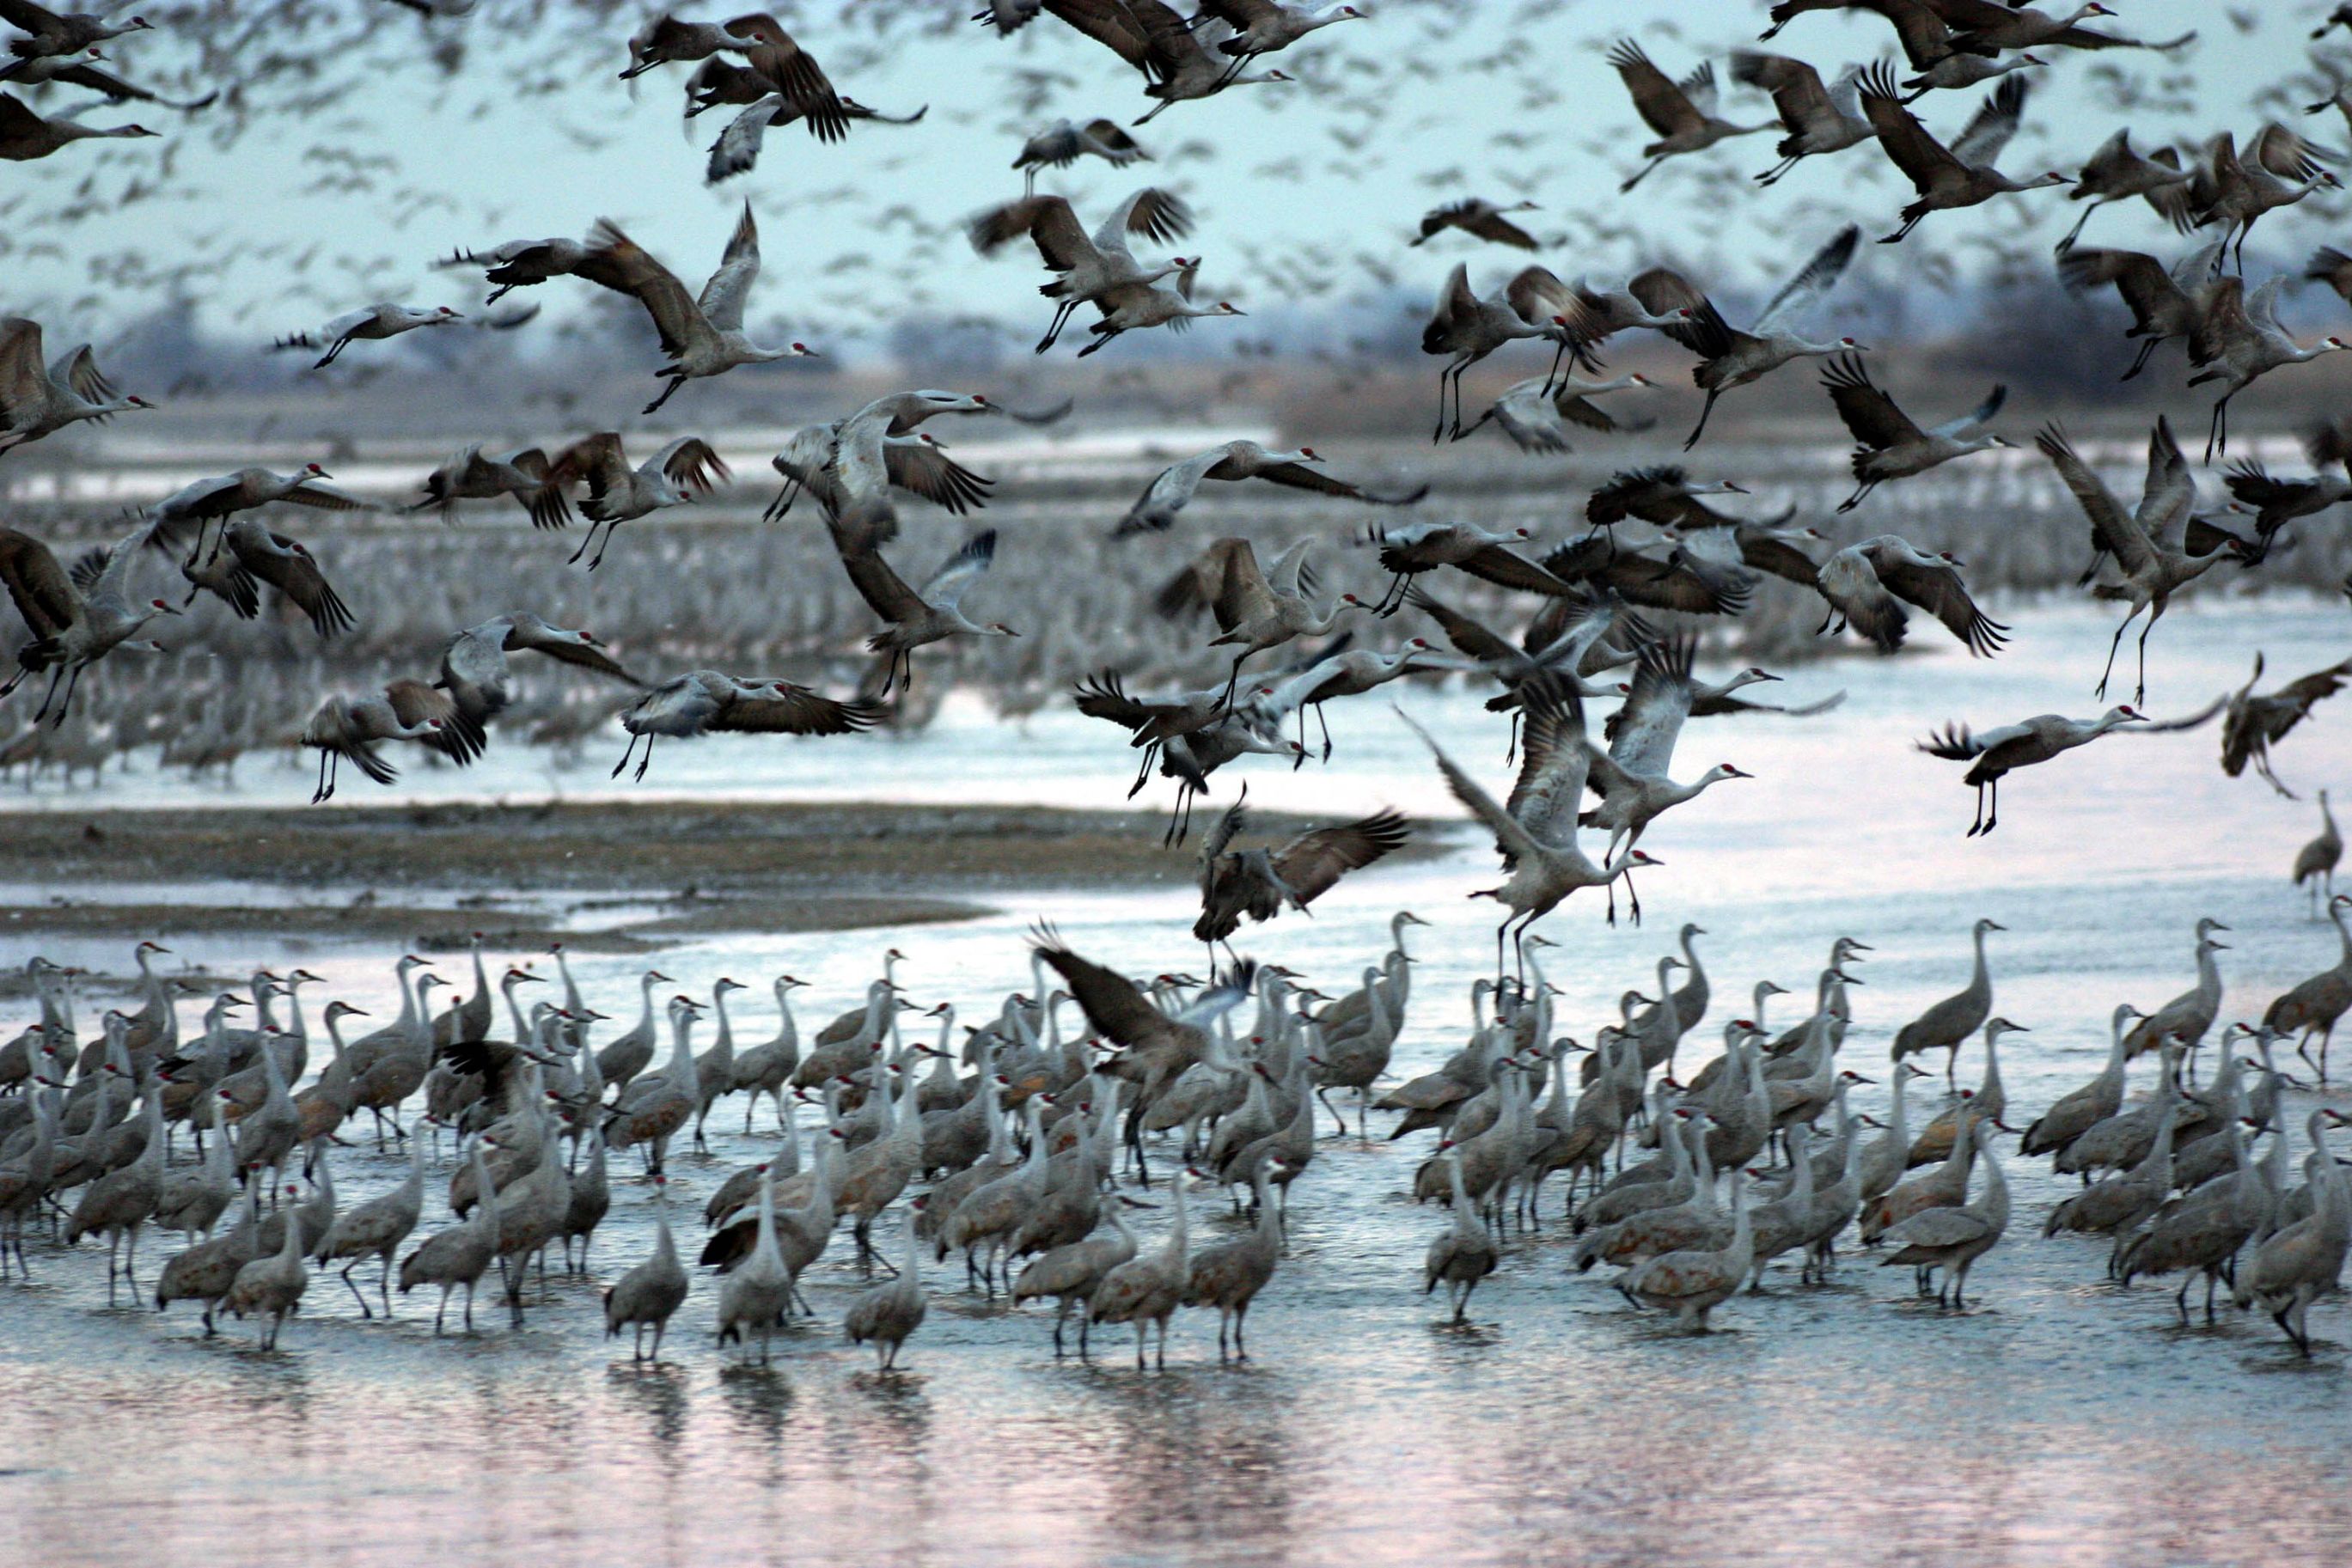 sandhills cranes stand in a river while around them other cranes take off to begin the next leg of their migration flight